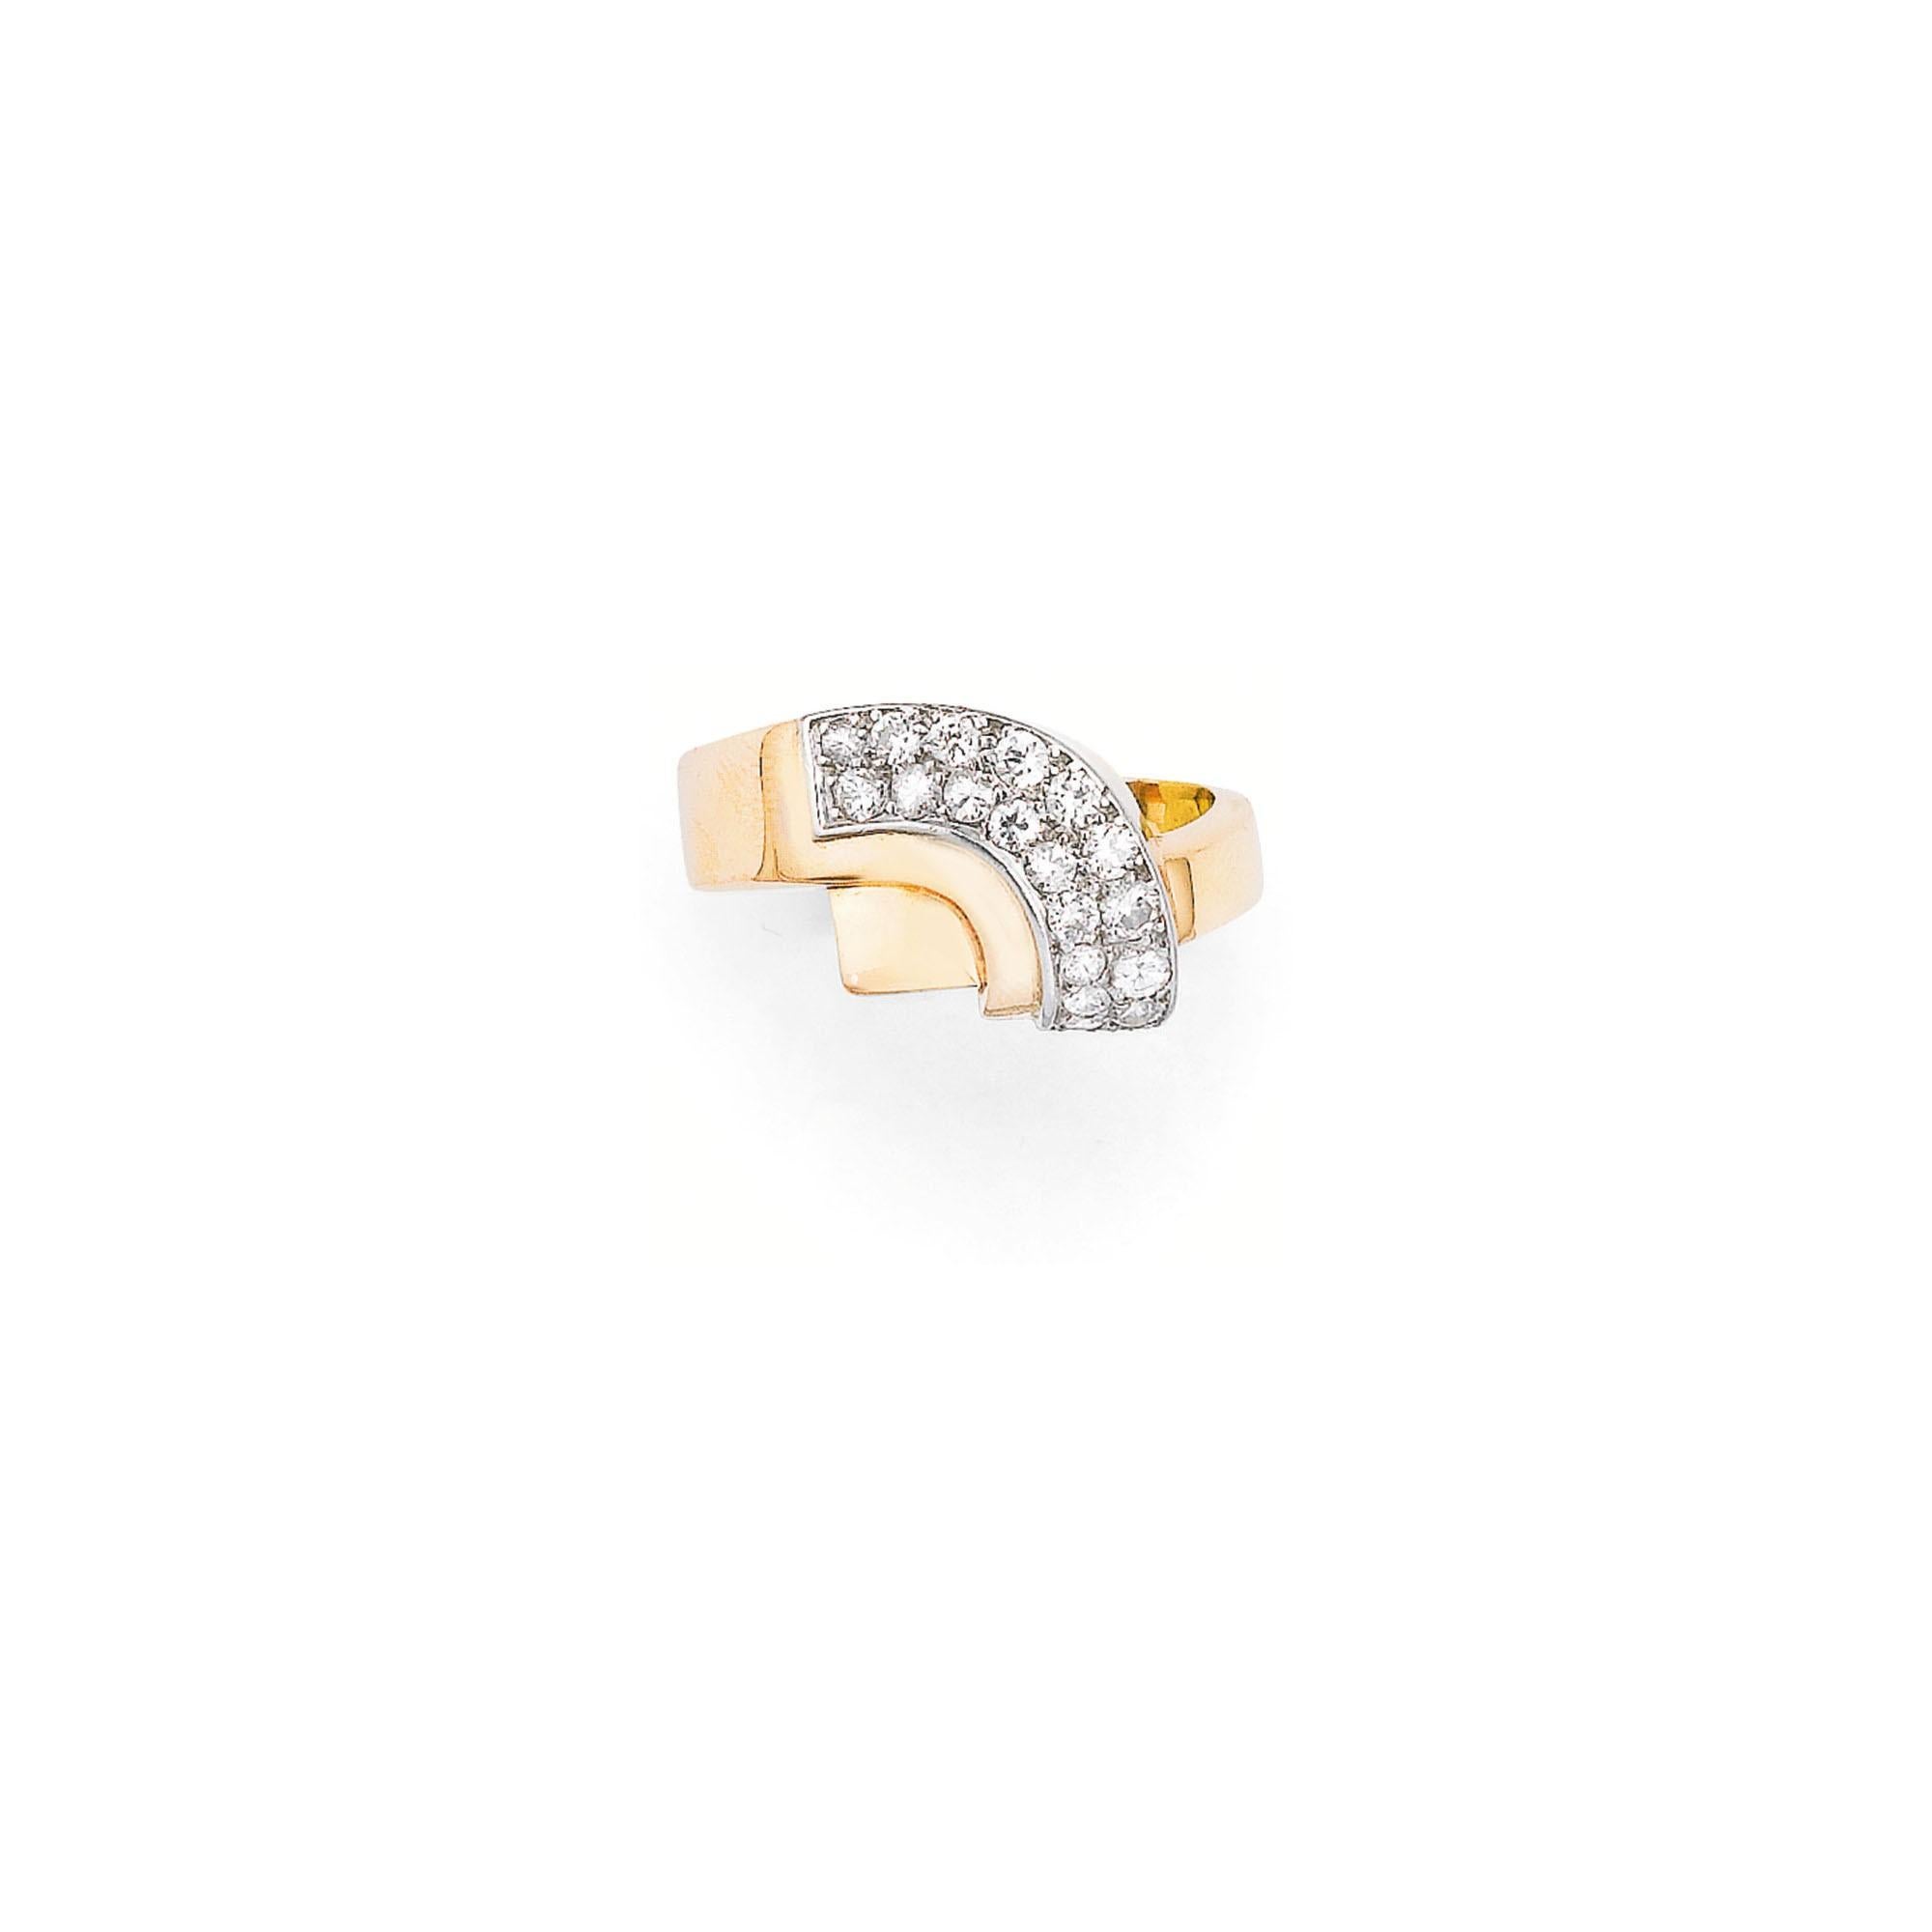 A chic Van Cleef Arpels ring of geometric design, set with circular-cut diamonds in 14 karat gold and platinum. Made in France.